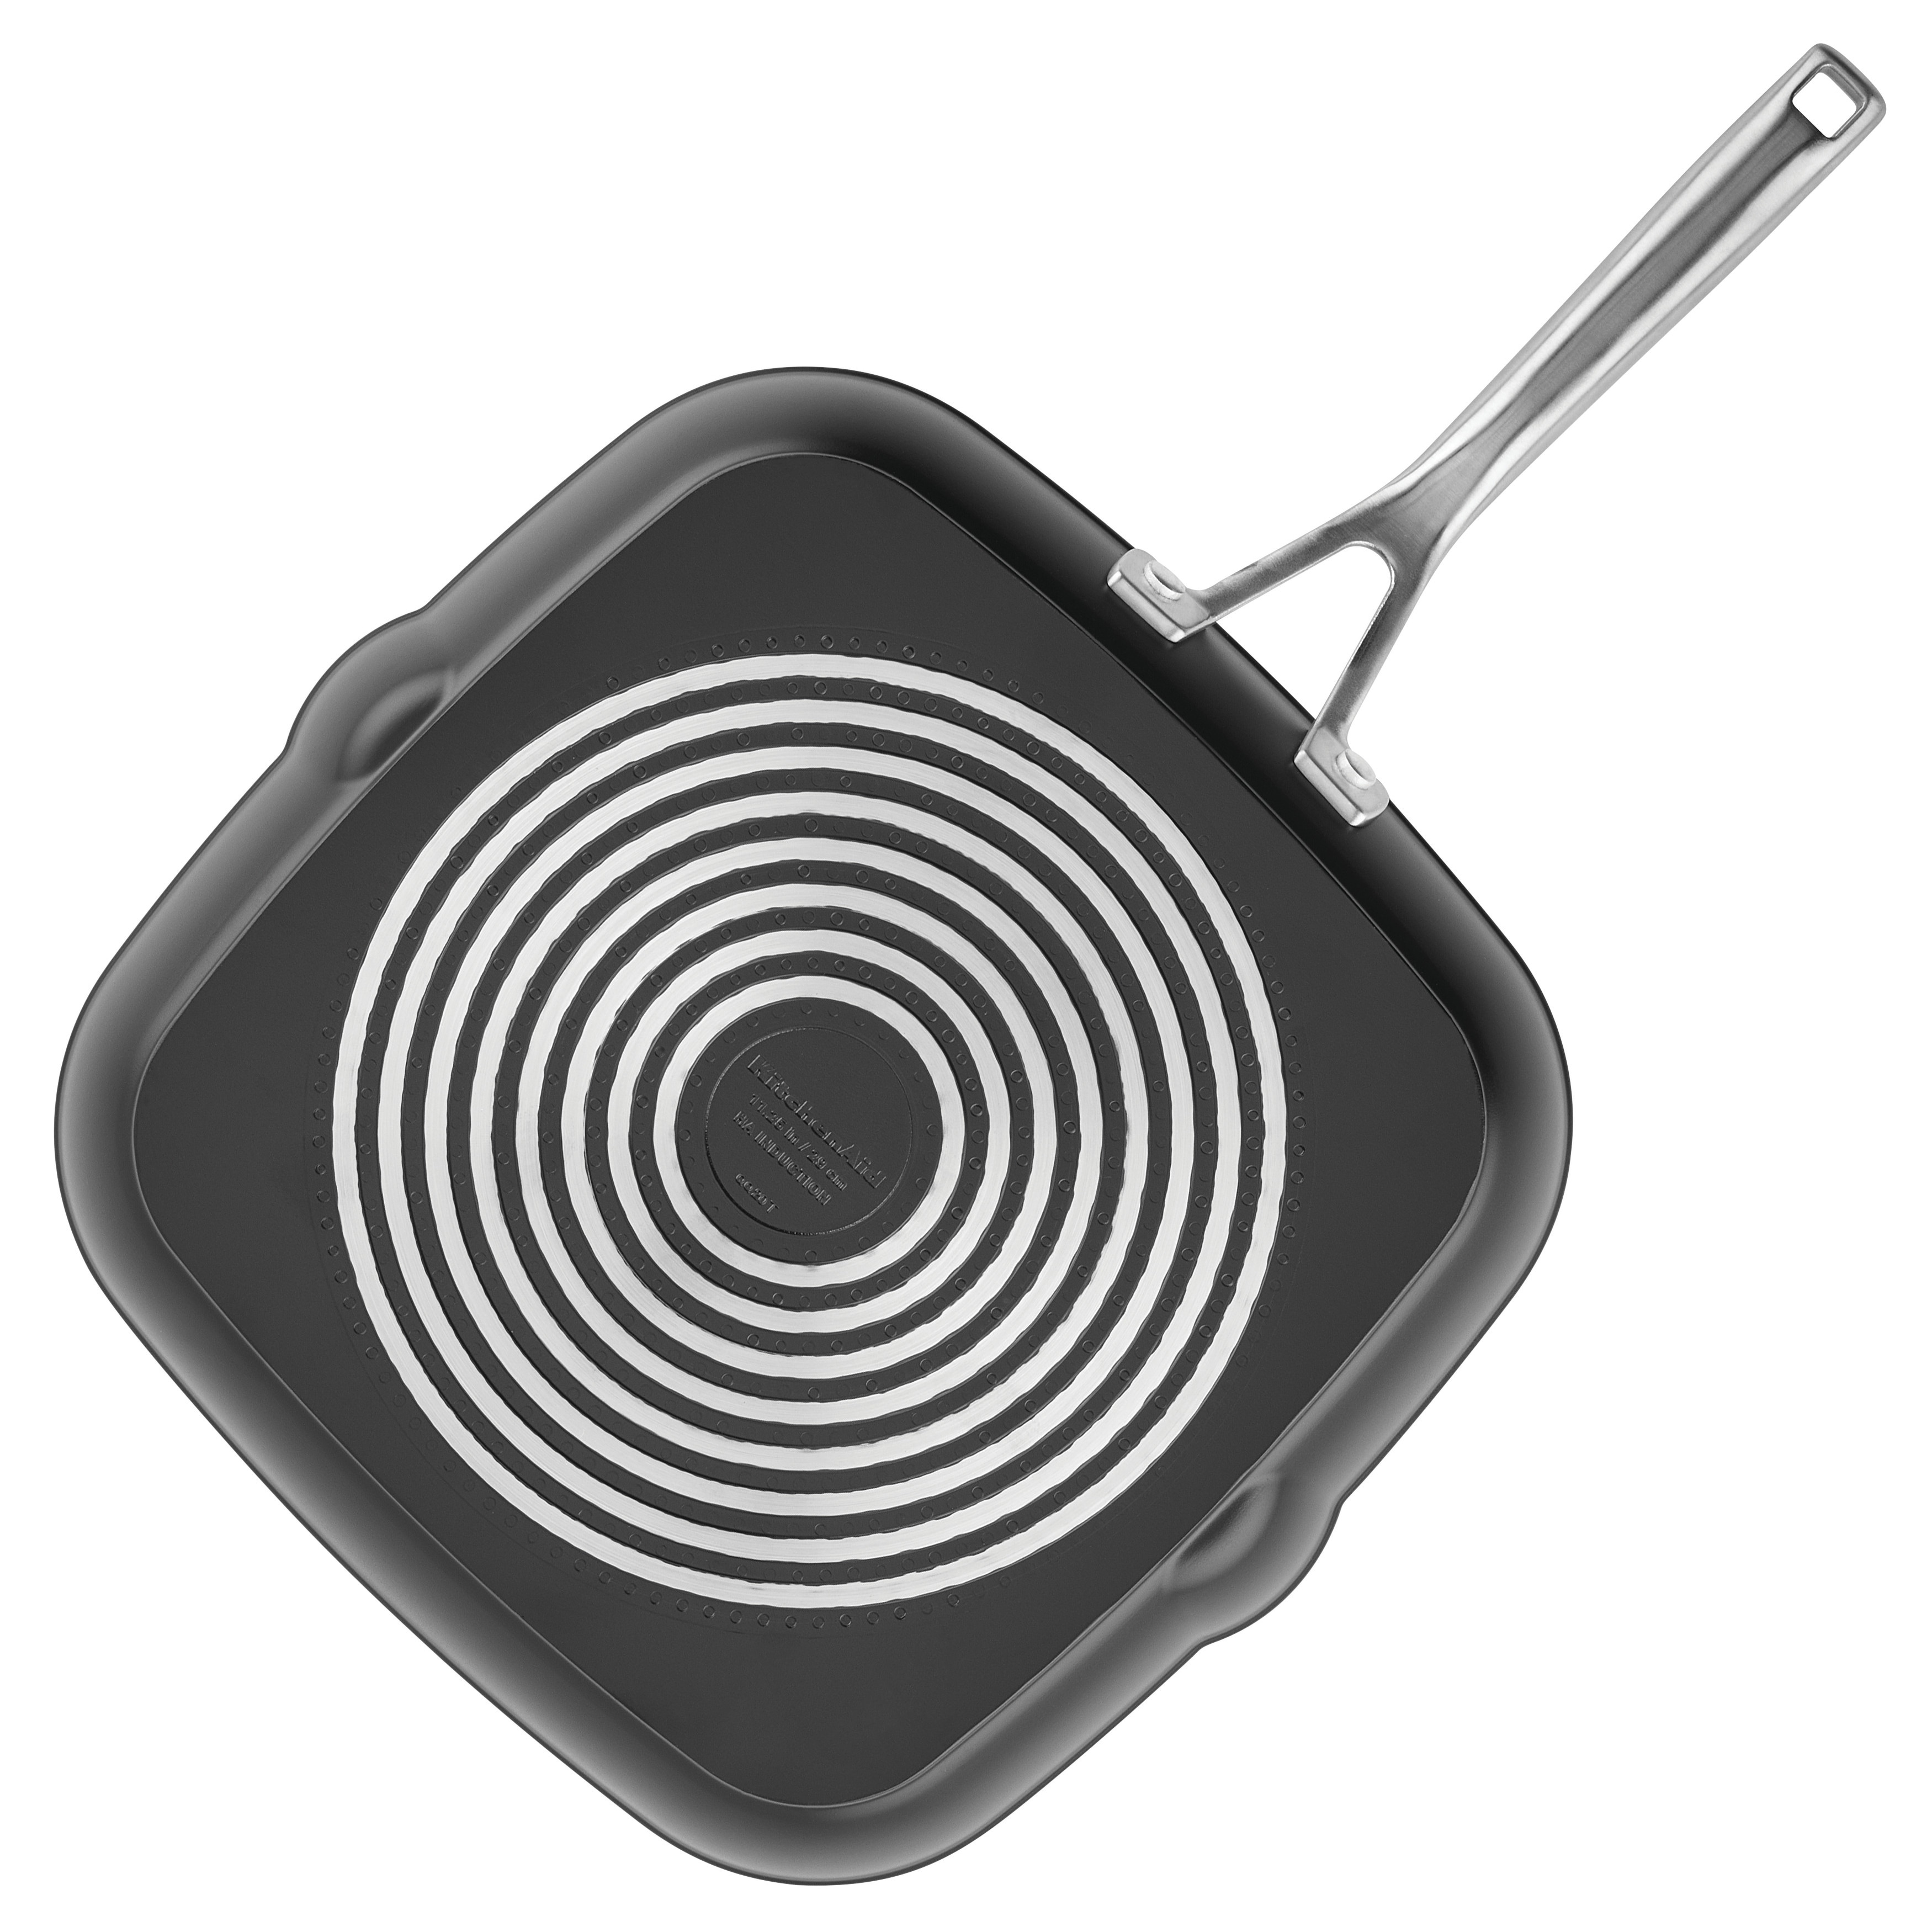 https://ak1.ostkcdn.com/images/products/is/images/direct/5b8a3a09775e86a739273f65fa0023bf4c2743cb/KitchenAid-Hard-Anodized-Induction-Nonstick-Stovetop-Grill-Pan%2C-11.25-Inch%2C-Matte-Black.jpg